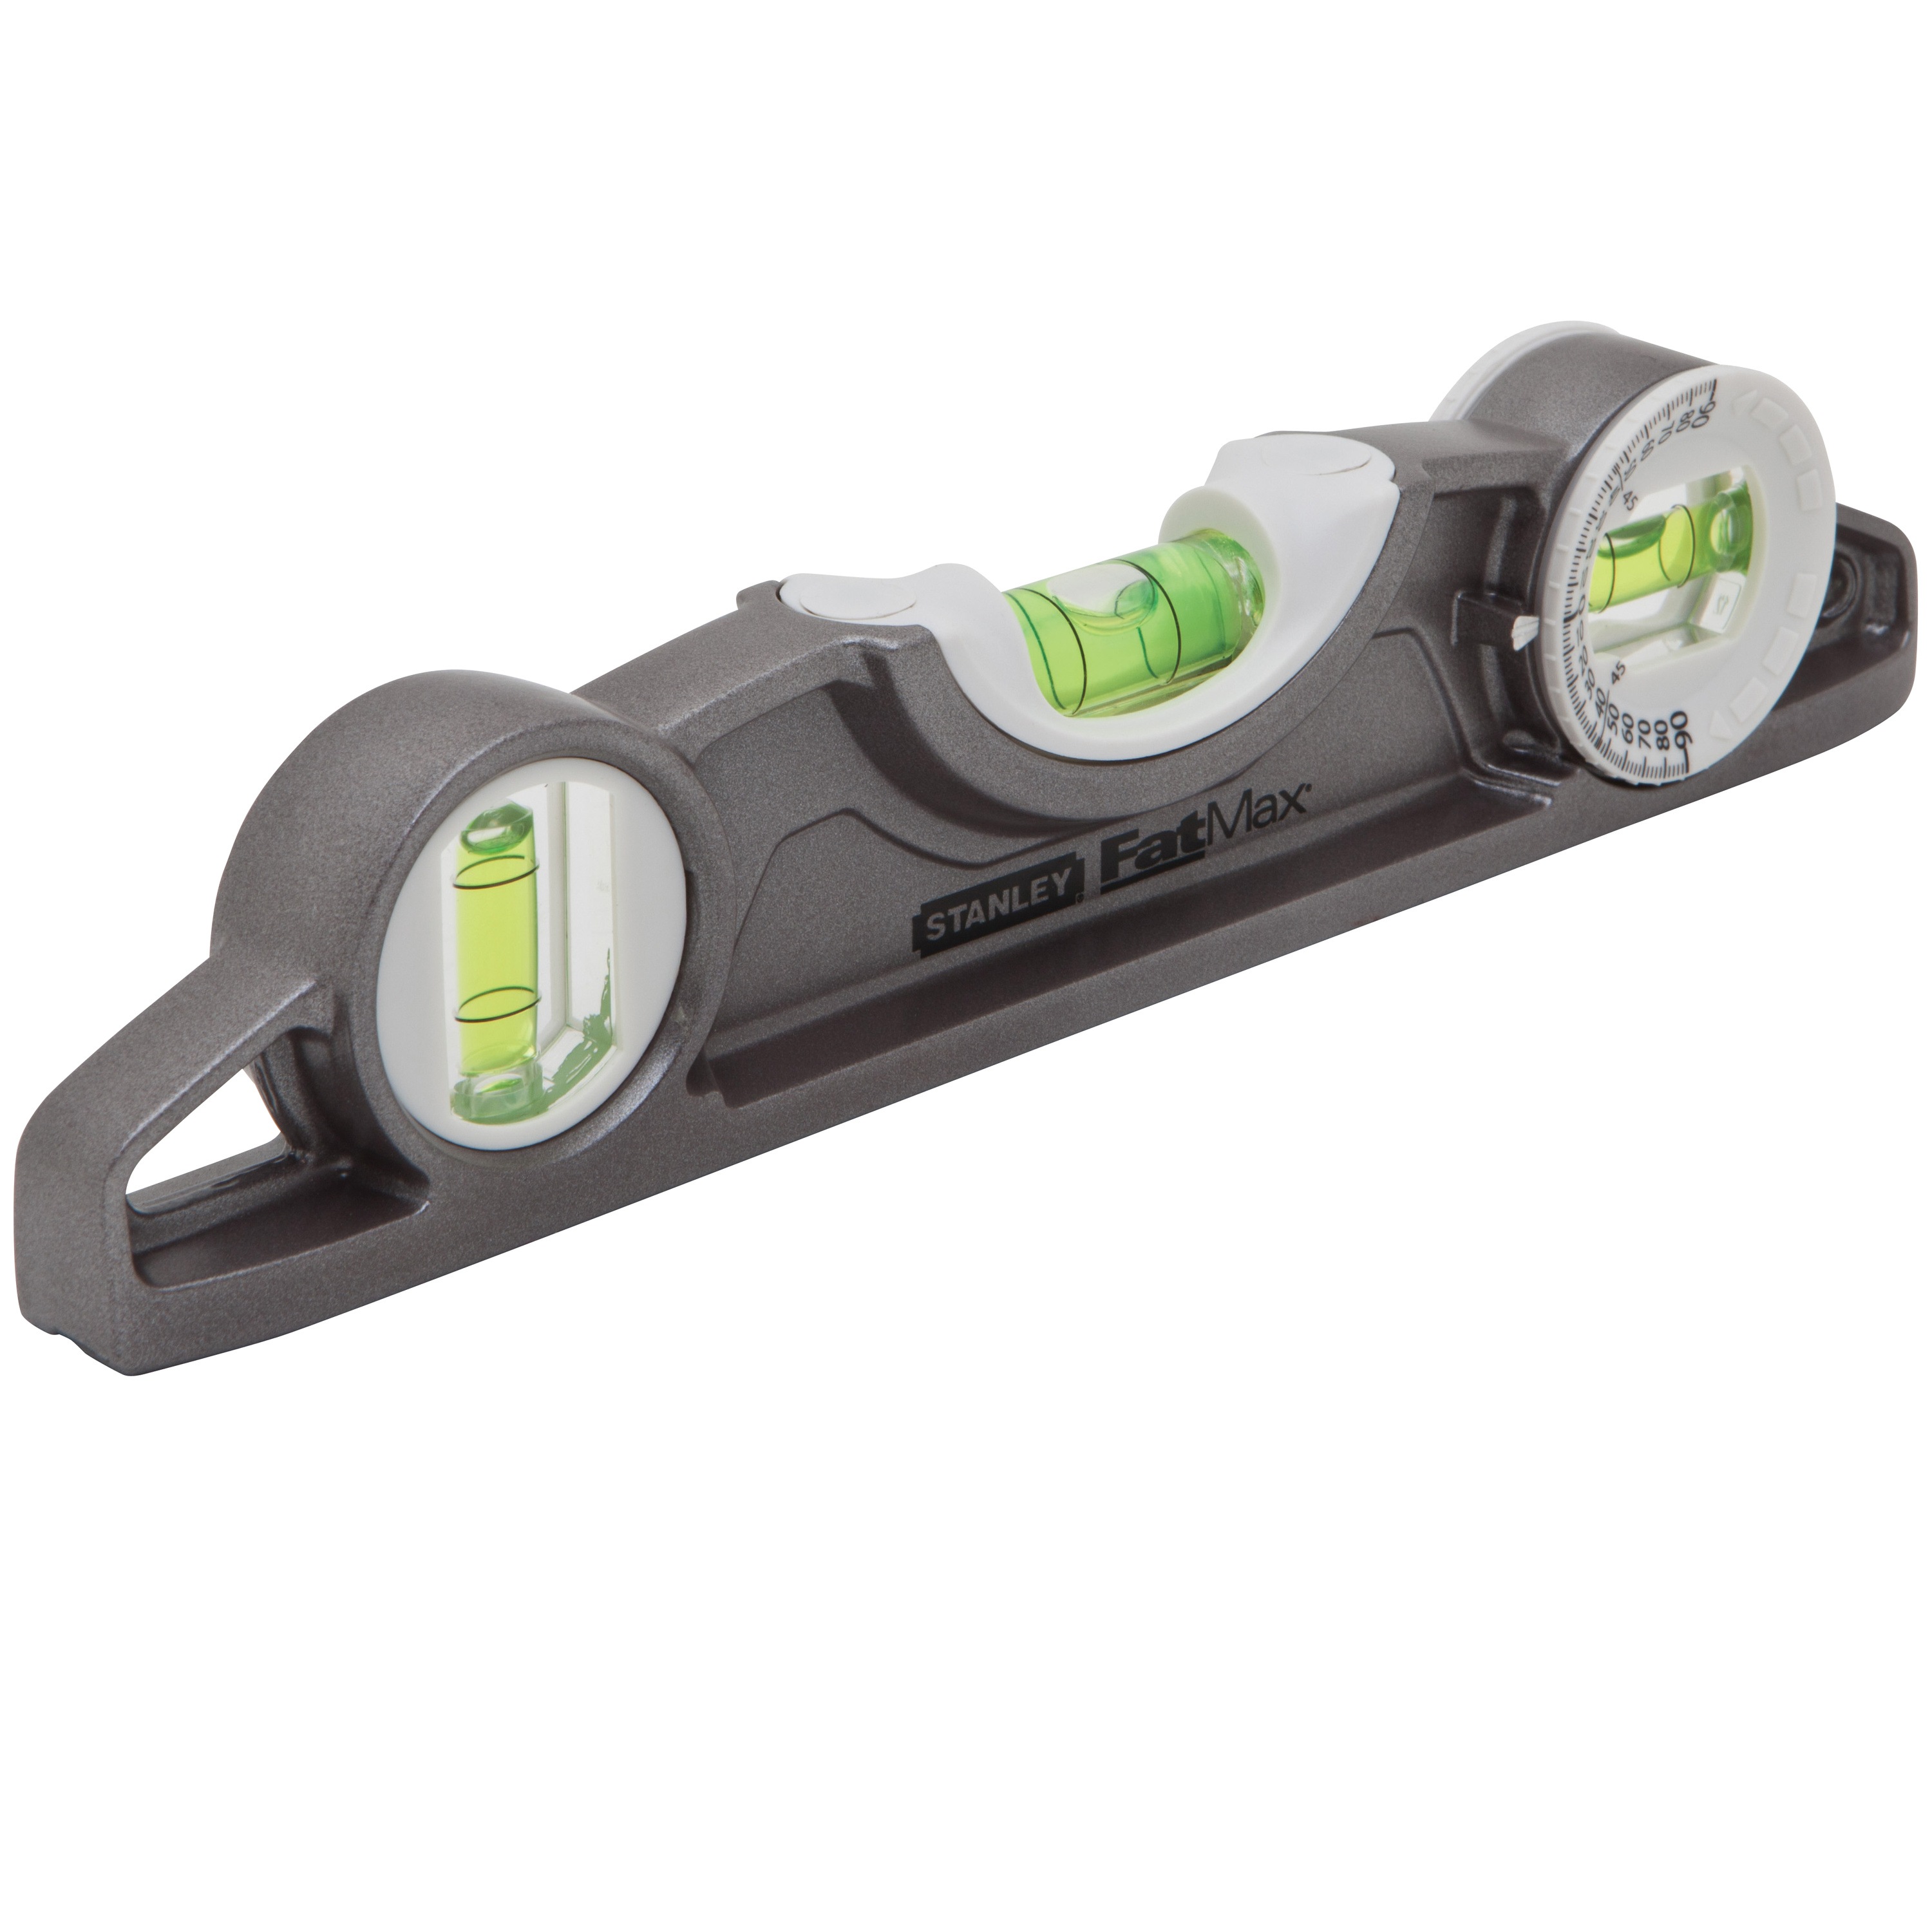 Stanley Tools - 1134 in FATMAX Magnetic Torpedo Level - 43-609